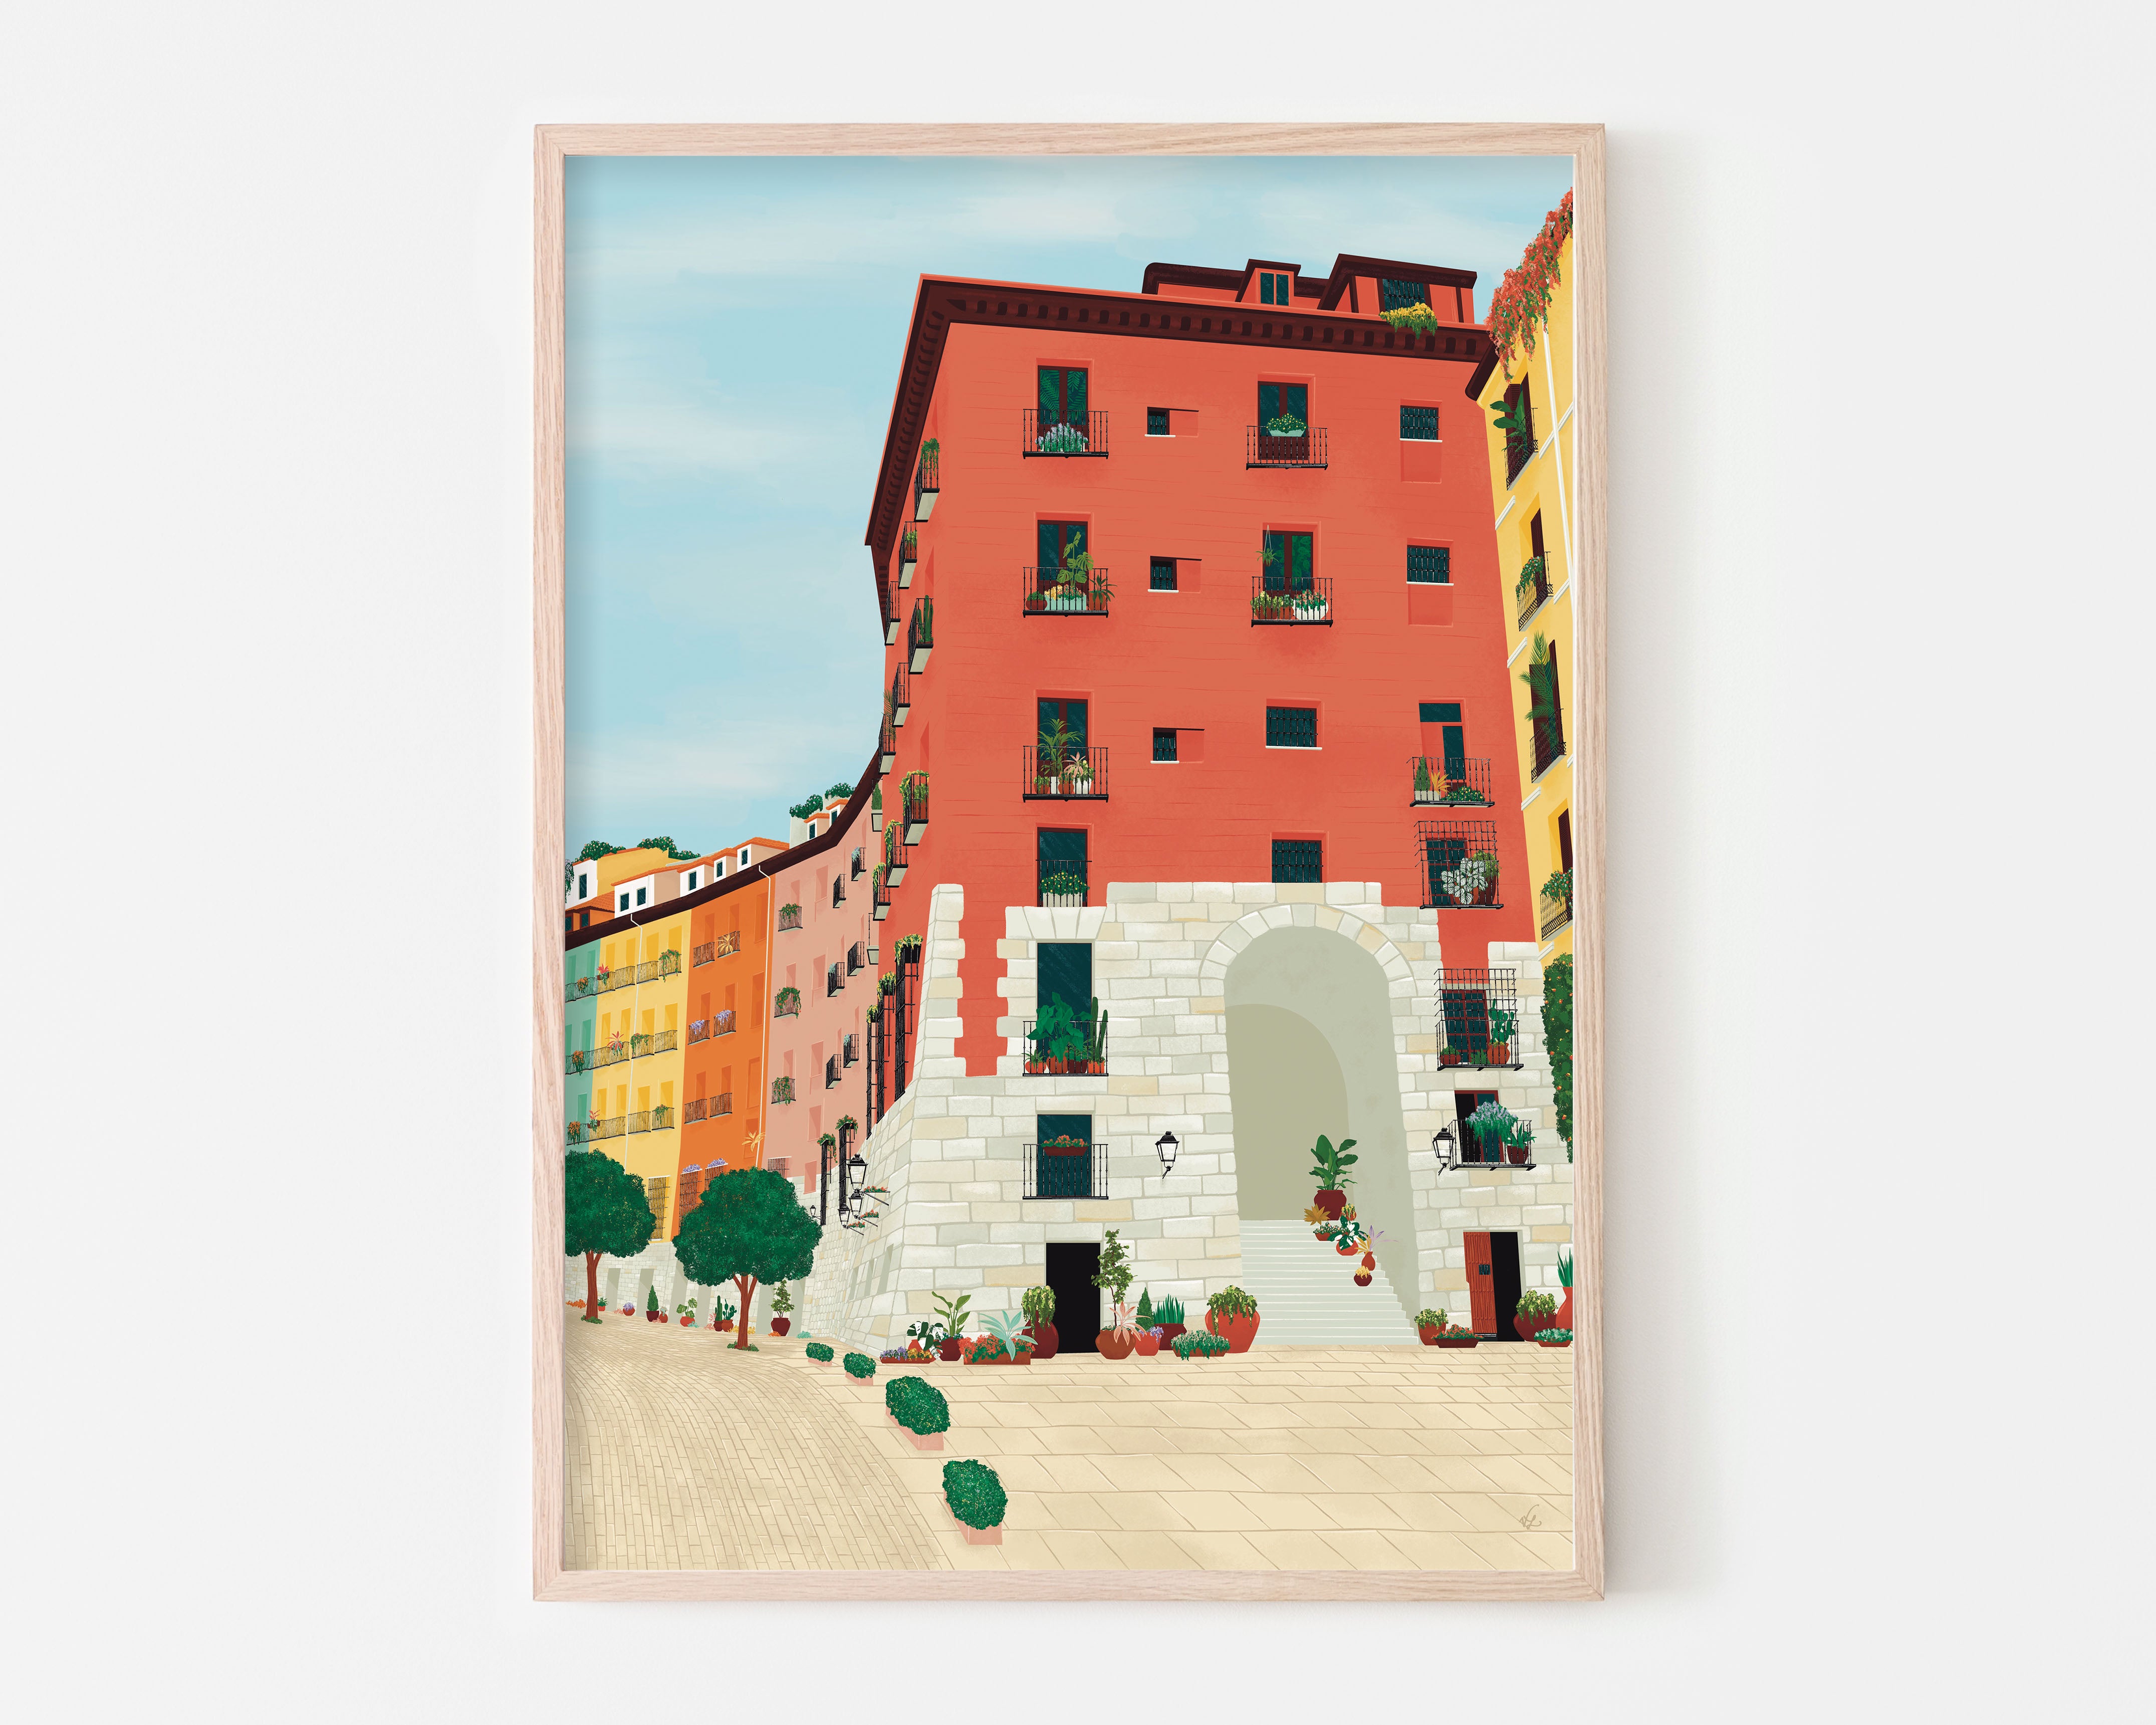 Arco de Cuchilleros in Madrid re-imaged in art print overflowing with plants and flowers. An illustration print filled with sunshine that is a perfect gift for travel enthusiasts.